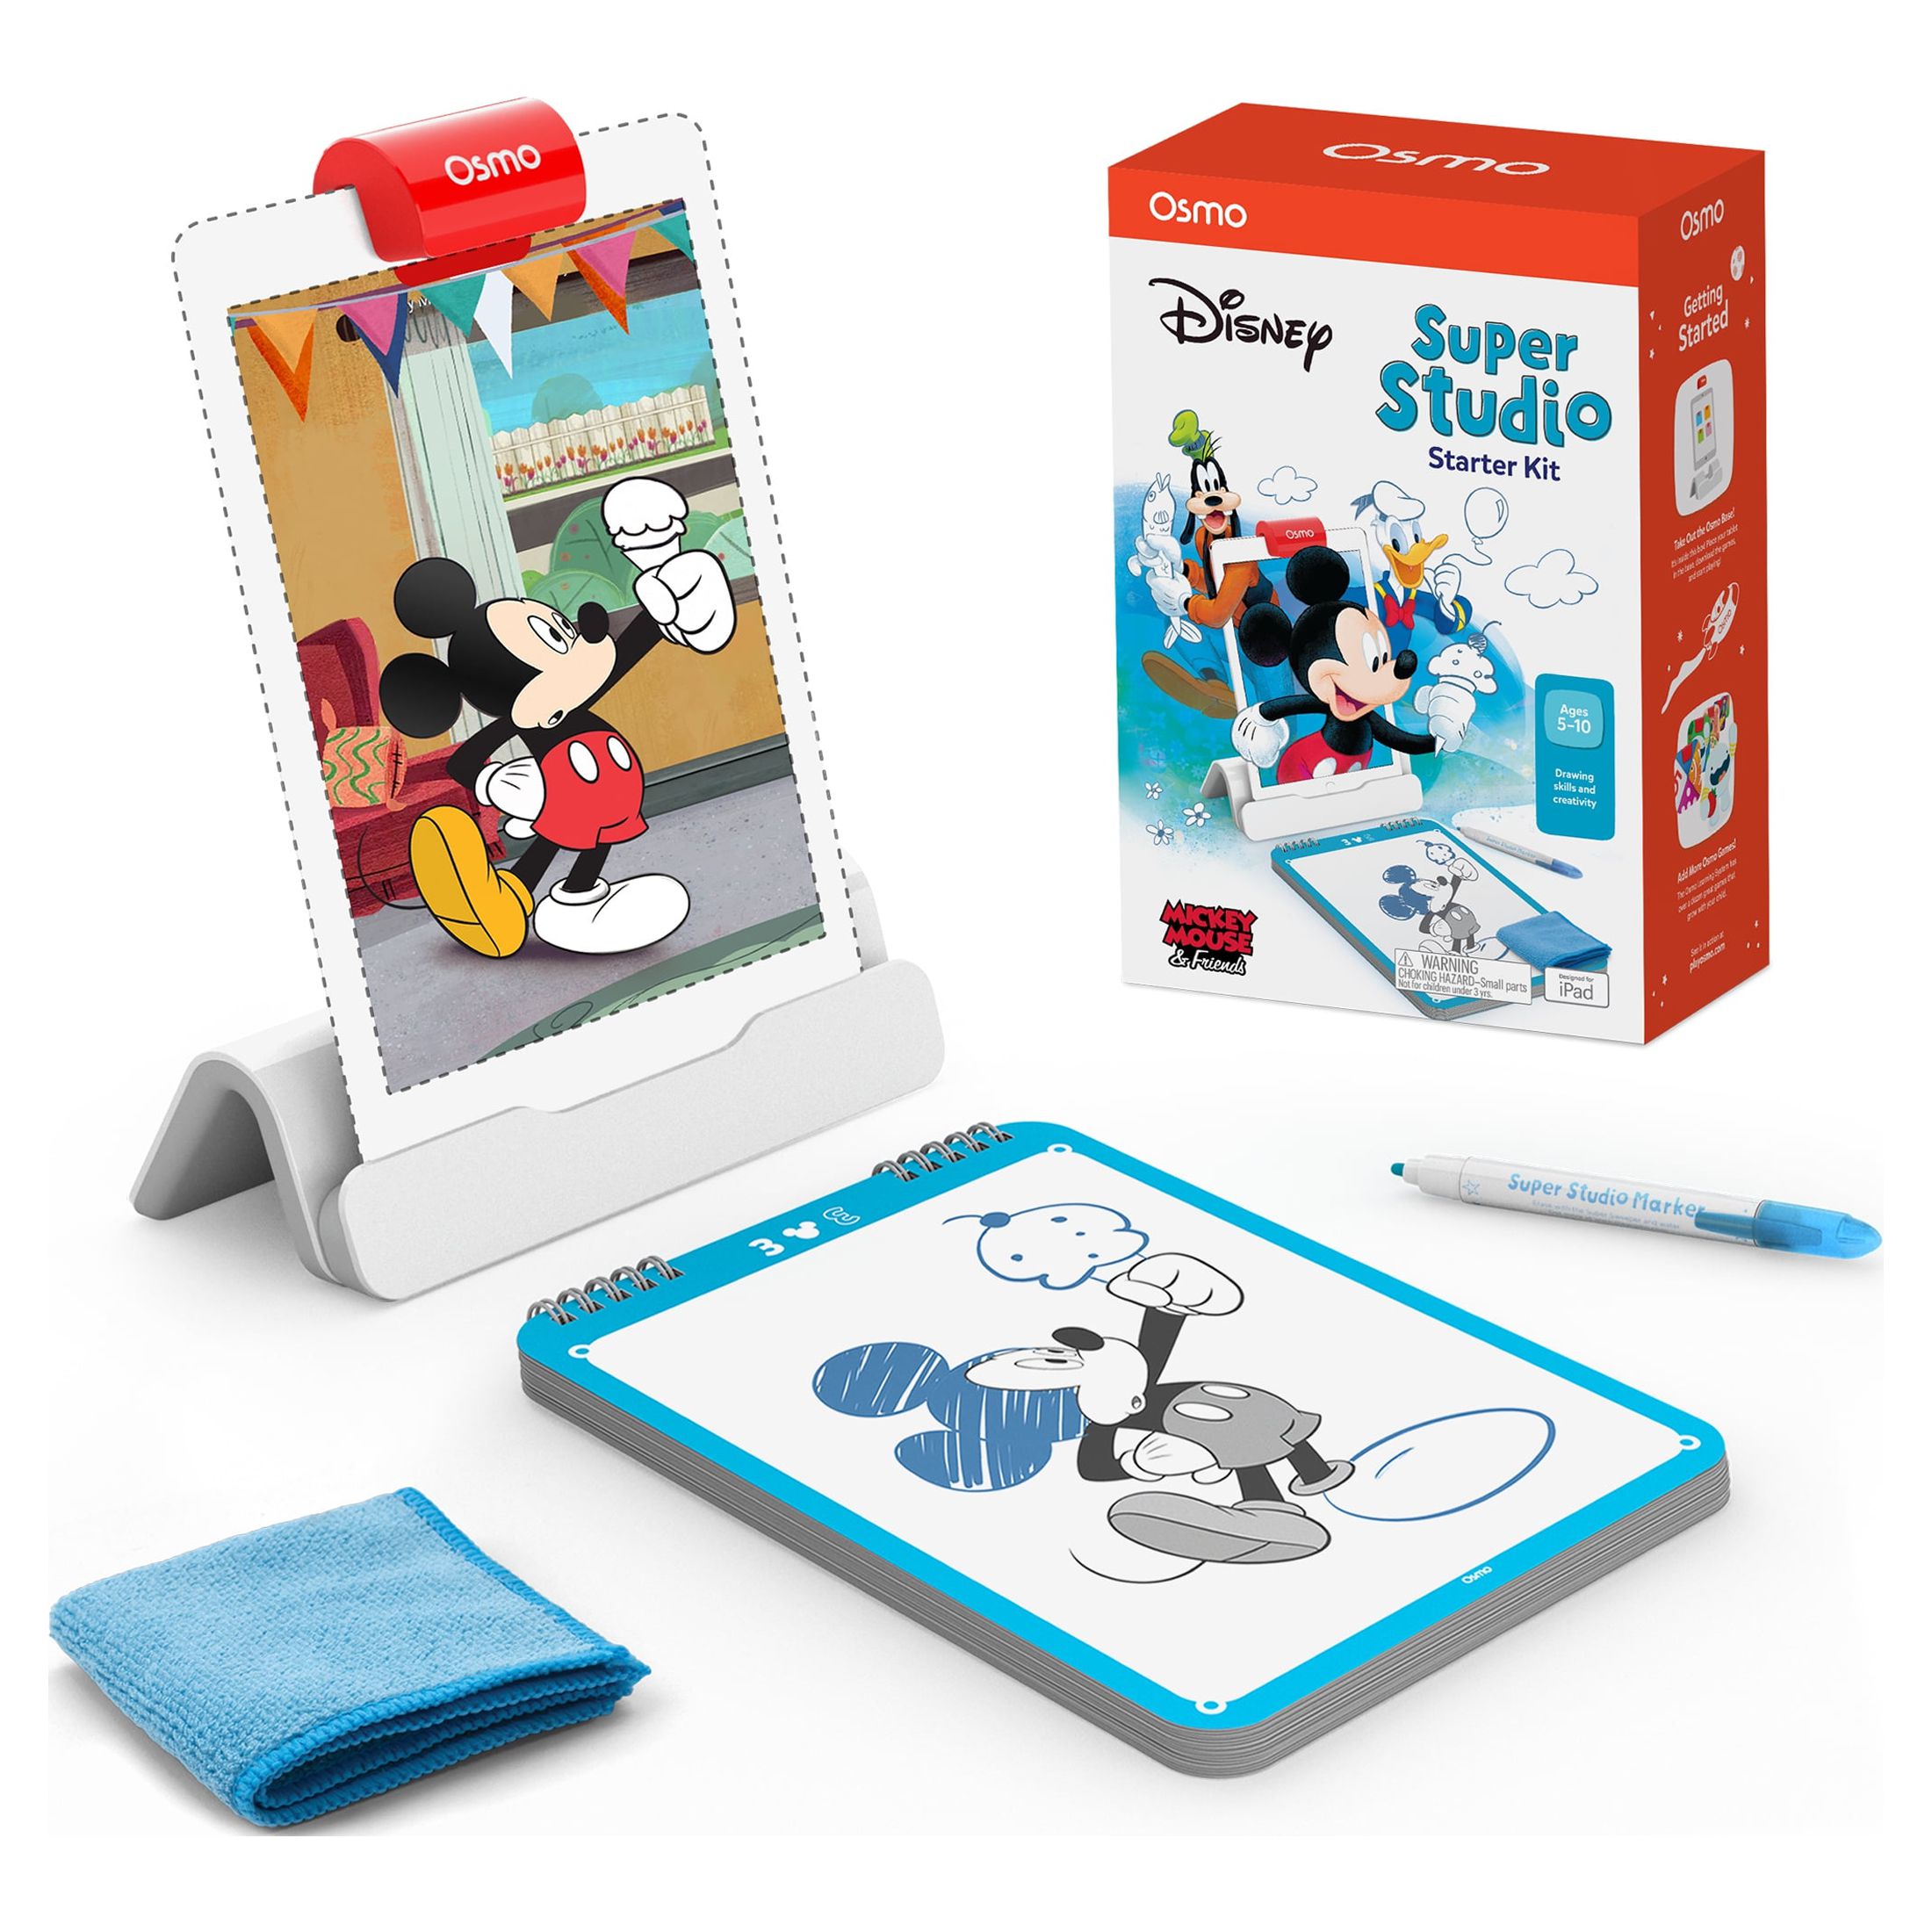 Osmo - Super Studio Disney Mickey Mouse & Friends Starter Kit - Age 6-12 - Learn Disney Drawings, 100+ Cartoon Drawings, Erasable Drawing Board, Sketchbook, Drawing Pad, Art Sets, STEM Educational Toy - image 1 of 8